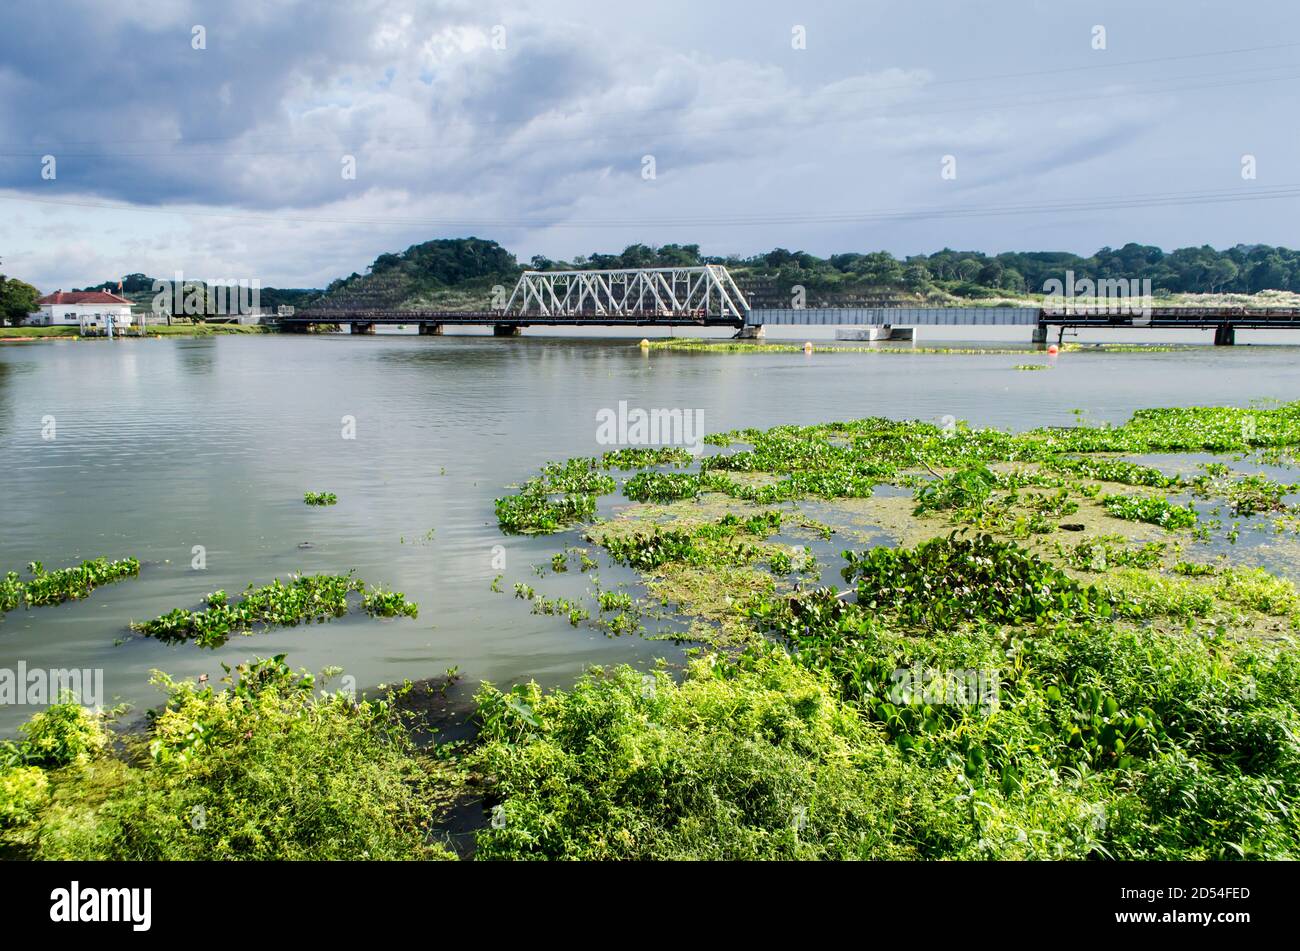 The Gamboa Bridge, the meeting place of the Chagres River and the Panama Canal during the wet season Stock Photo